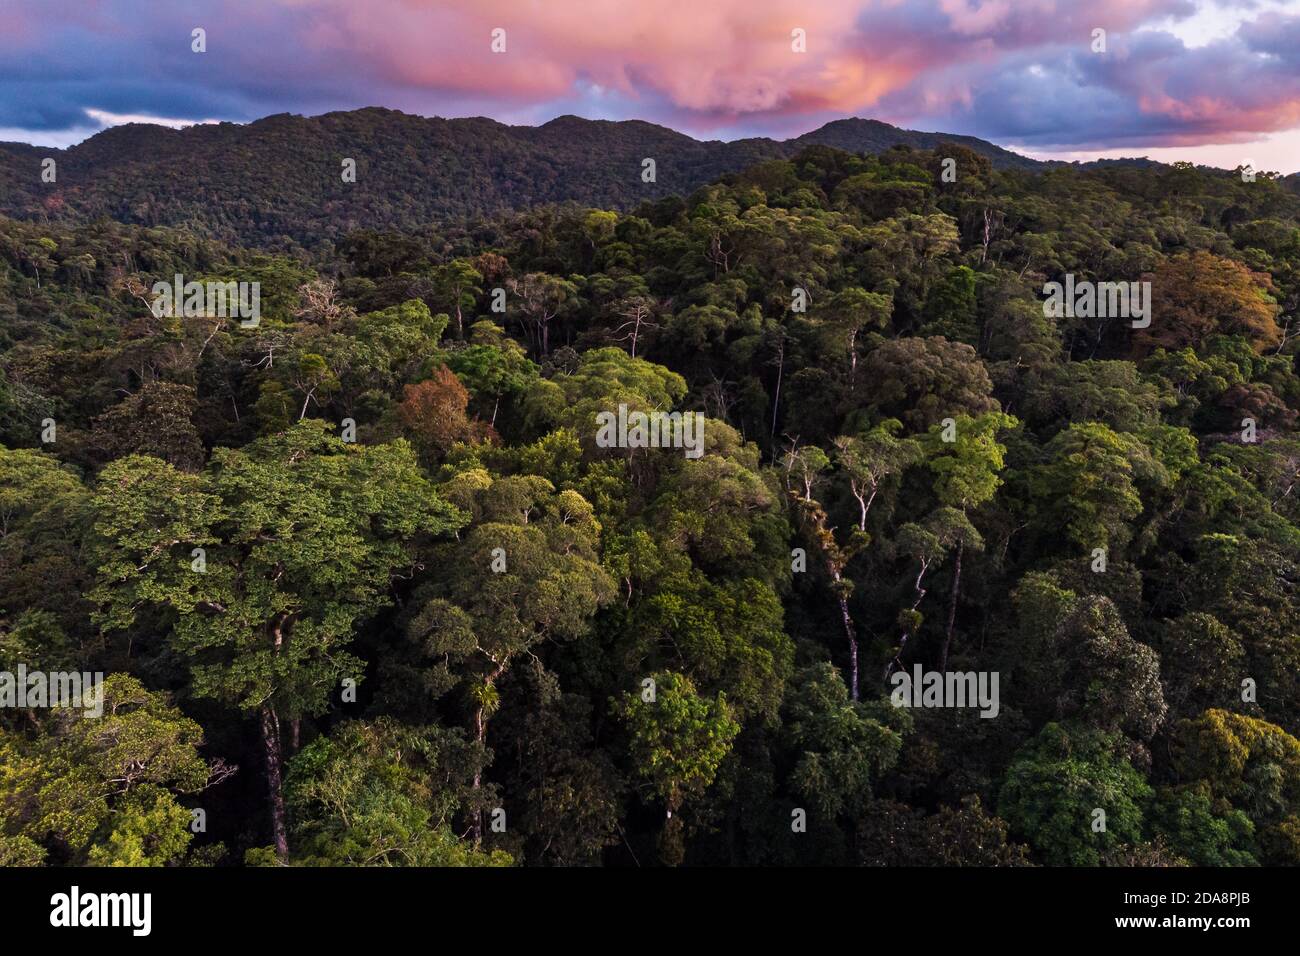 The Atlantic Rainforest of southern São Paulo State seen from above Stock Photo